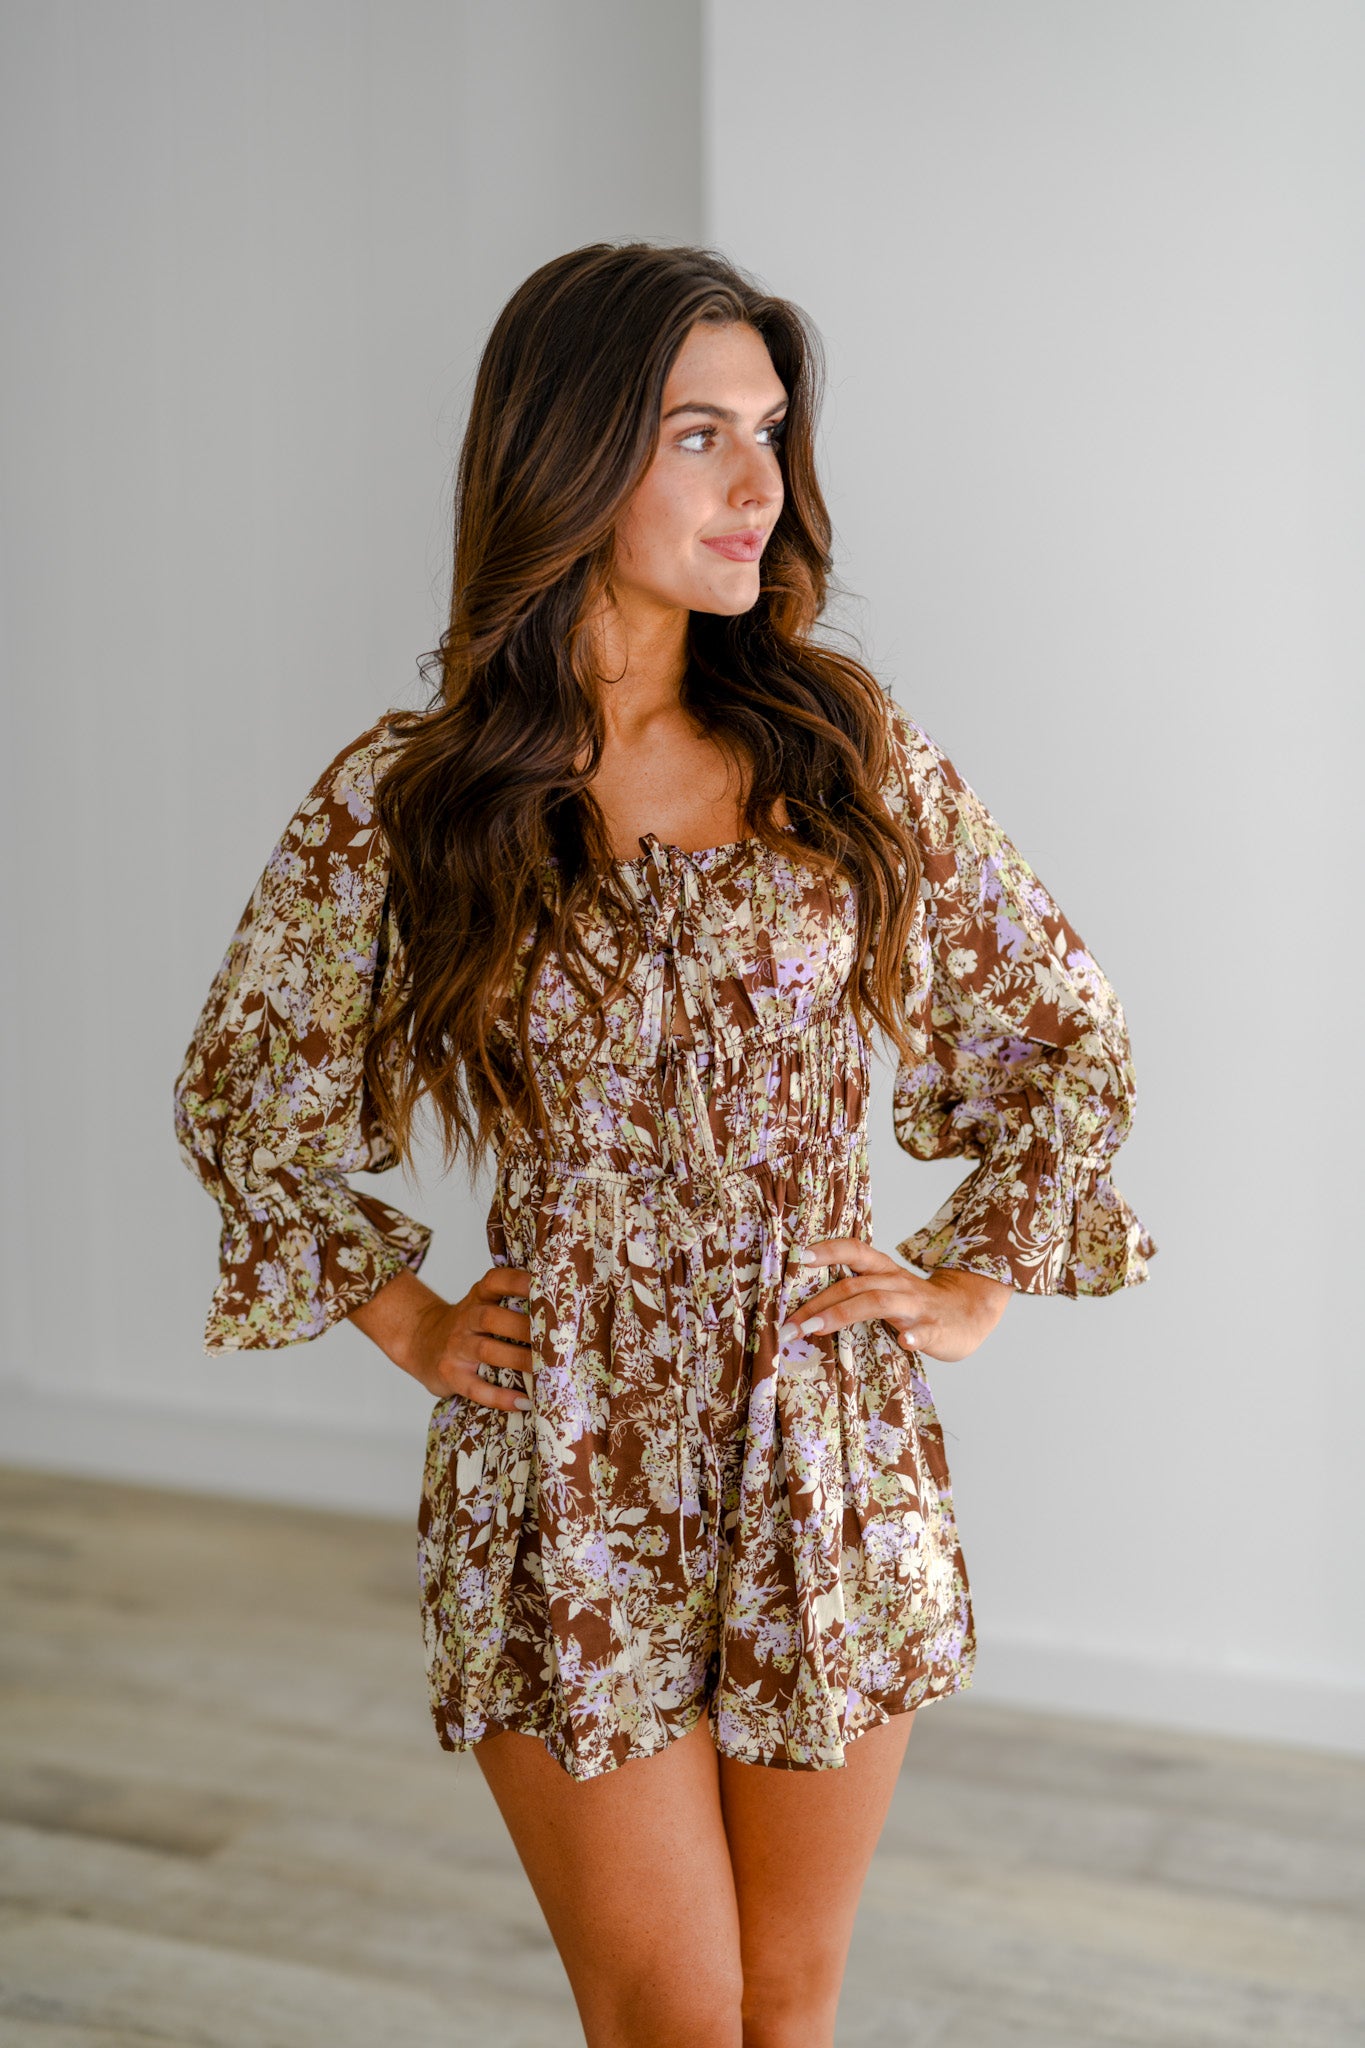 Autumn Long Sleeve Floral Romper - Brown